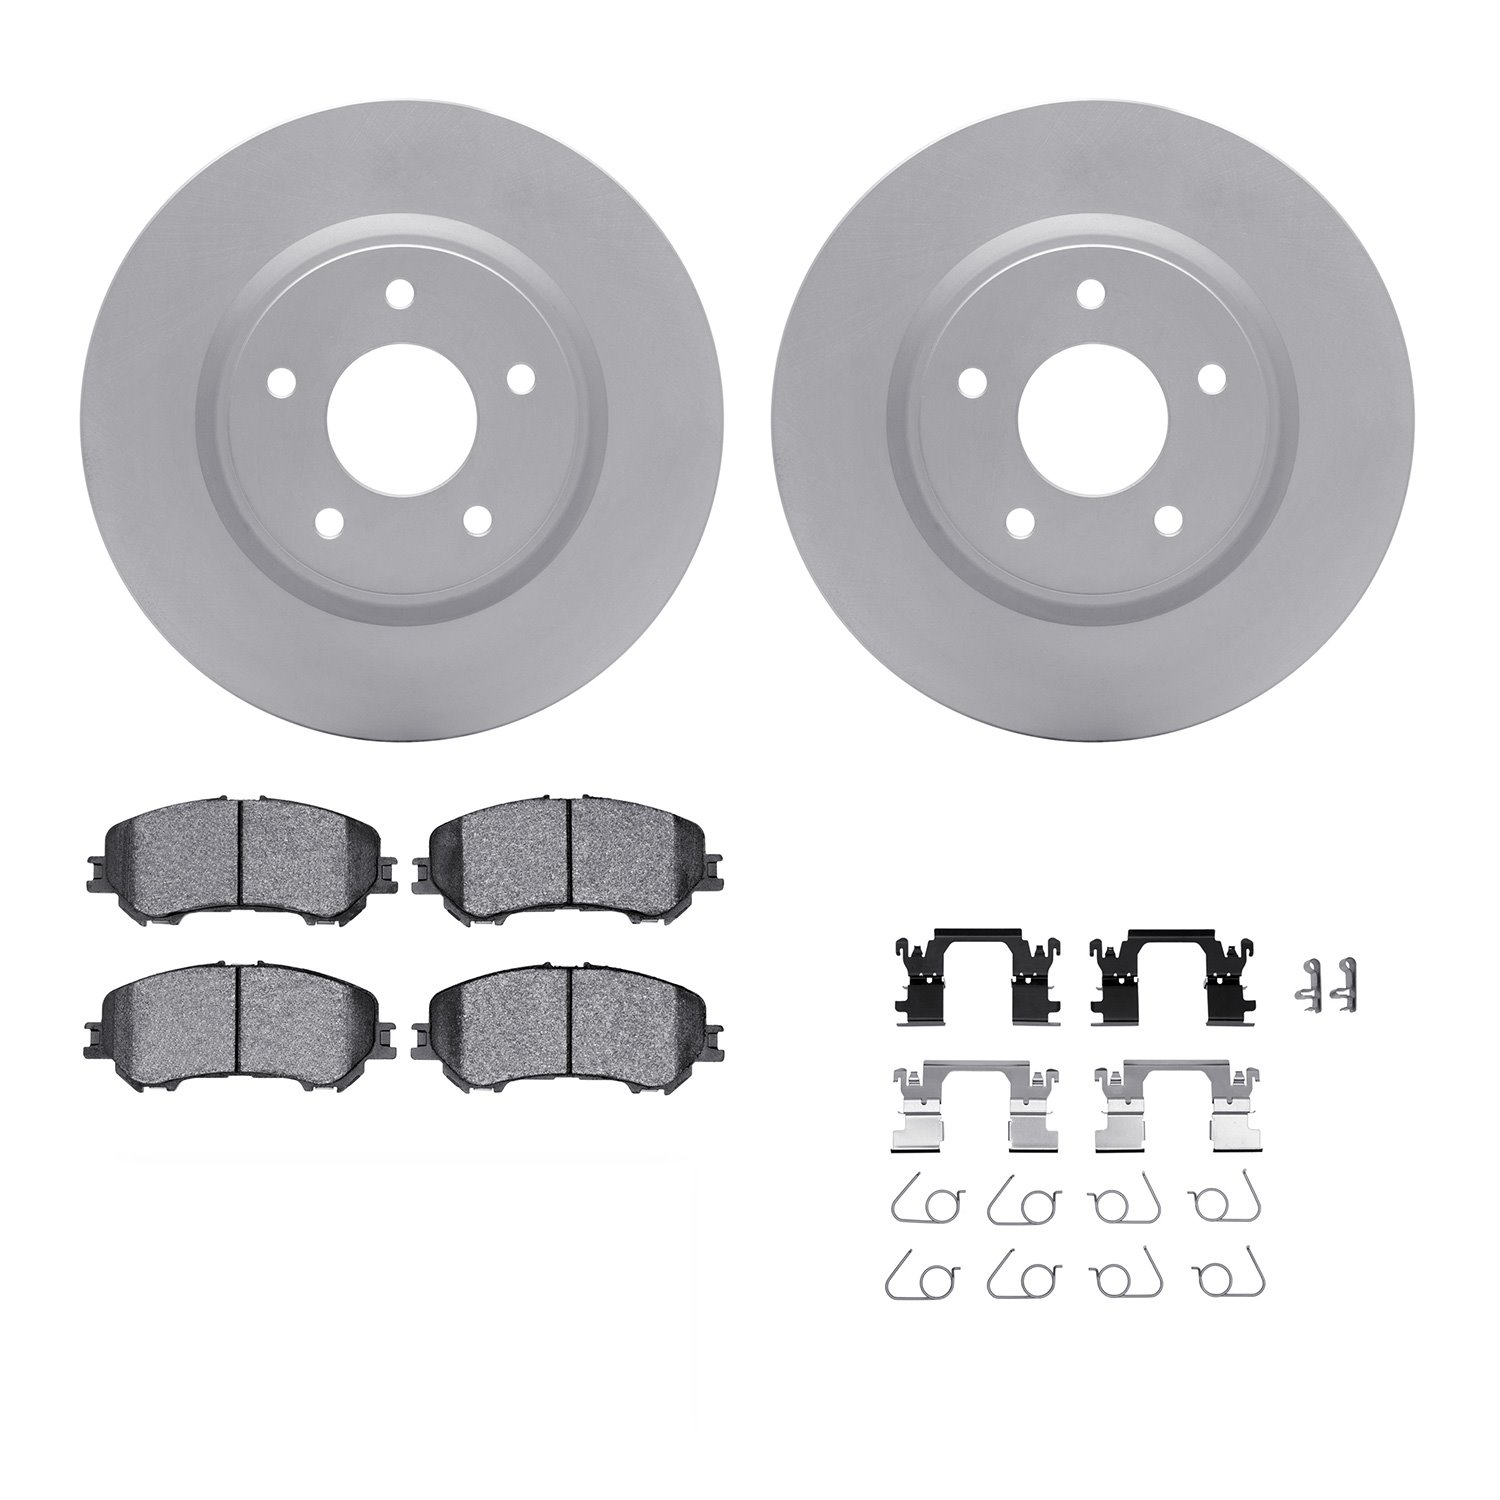 4312-67066 Geospec Brake Rotors with 3000-Series Ceramic Brake Pads & Hardware, Fits Select Multiple Makes/Models, Position: Fro